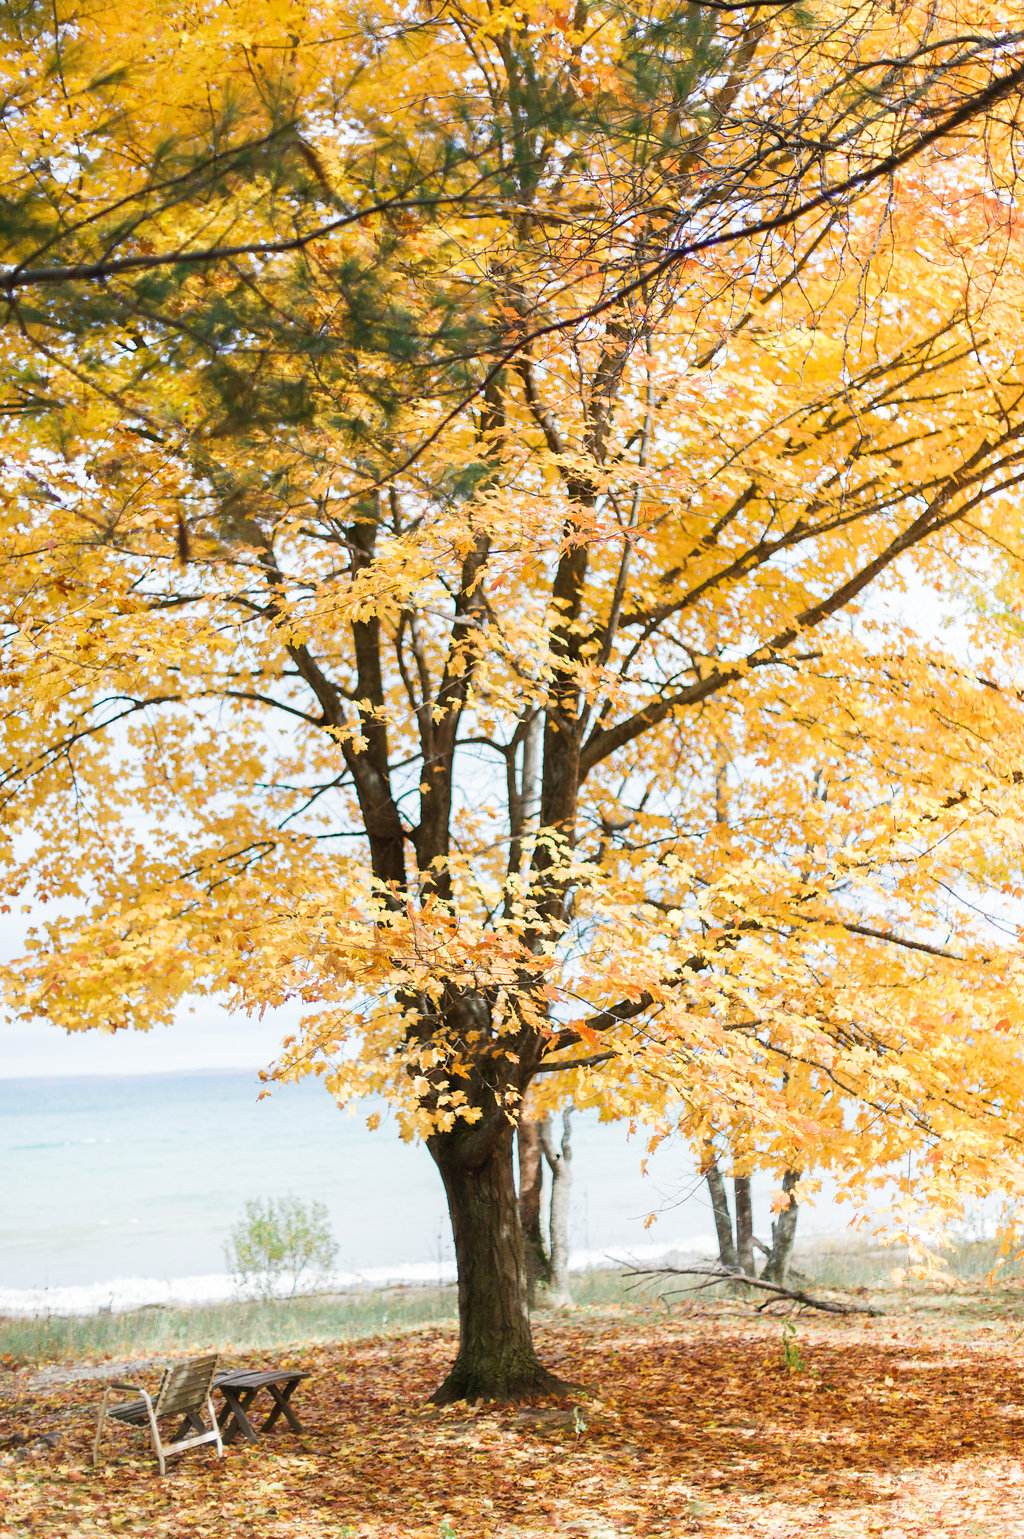 Autumn Leaves | The Day's Design | Kelly Sweet Photography